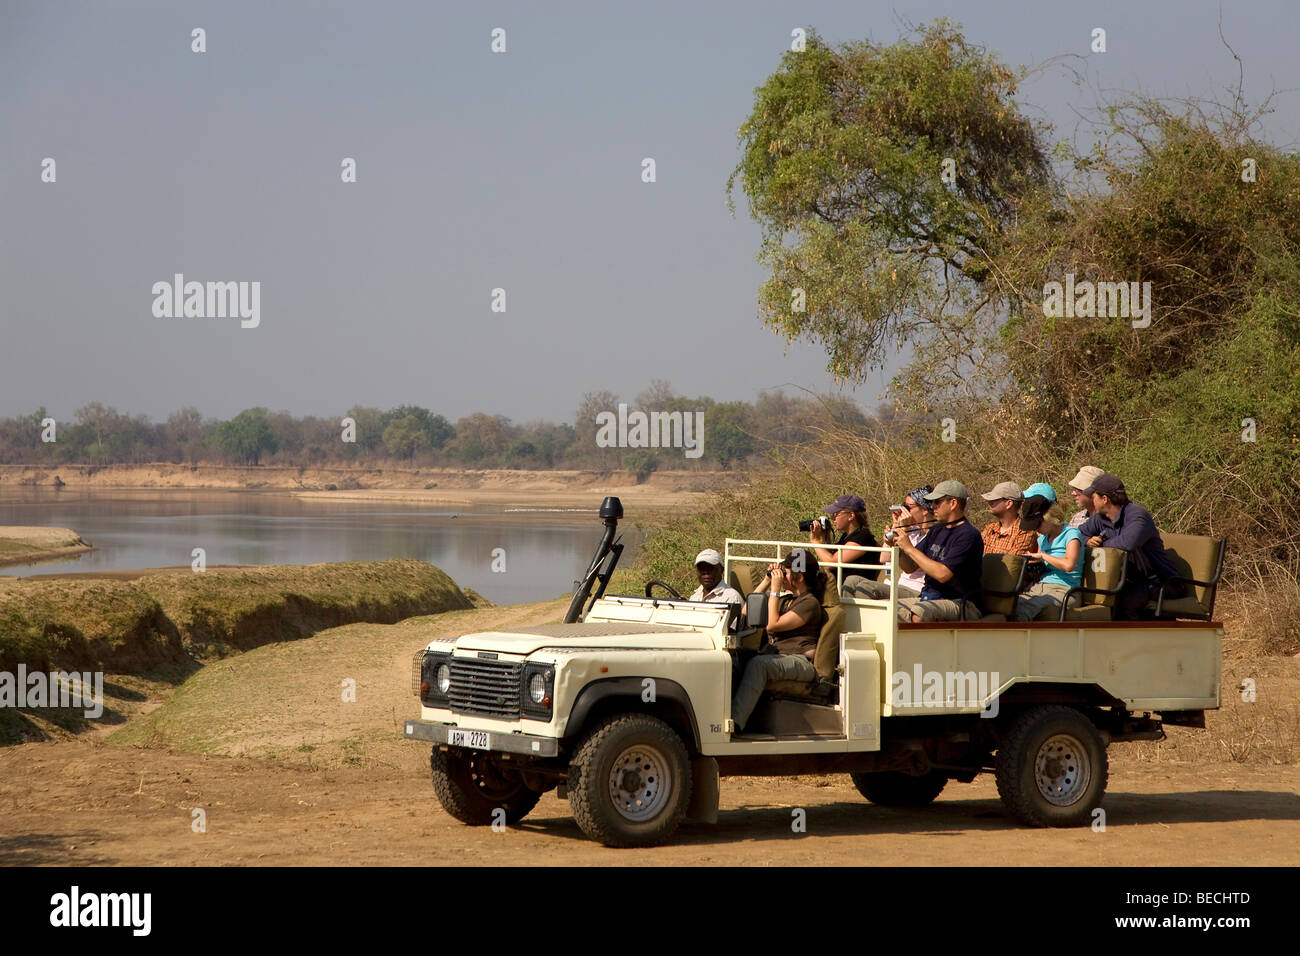 Safari trip, Game Drive, tourists in the South Luangwa National Park near Mfue, Eastern Province, Republic of Zambia, Africa Stock Photo